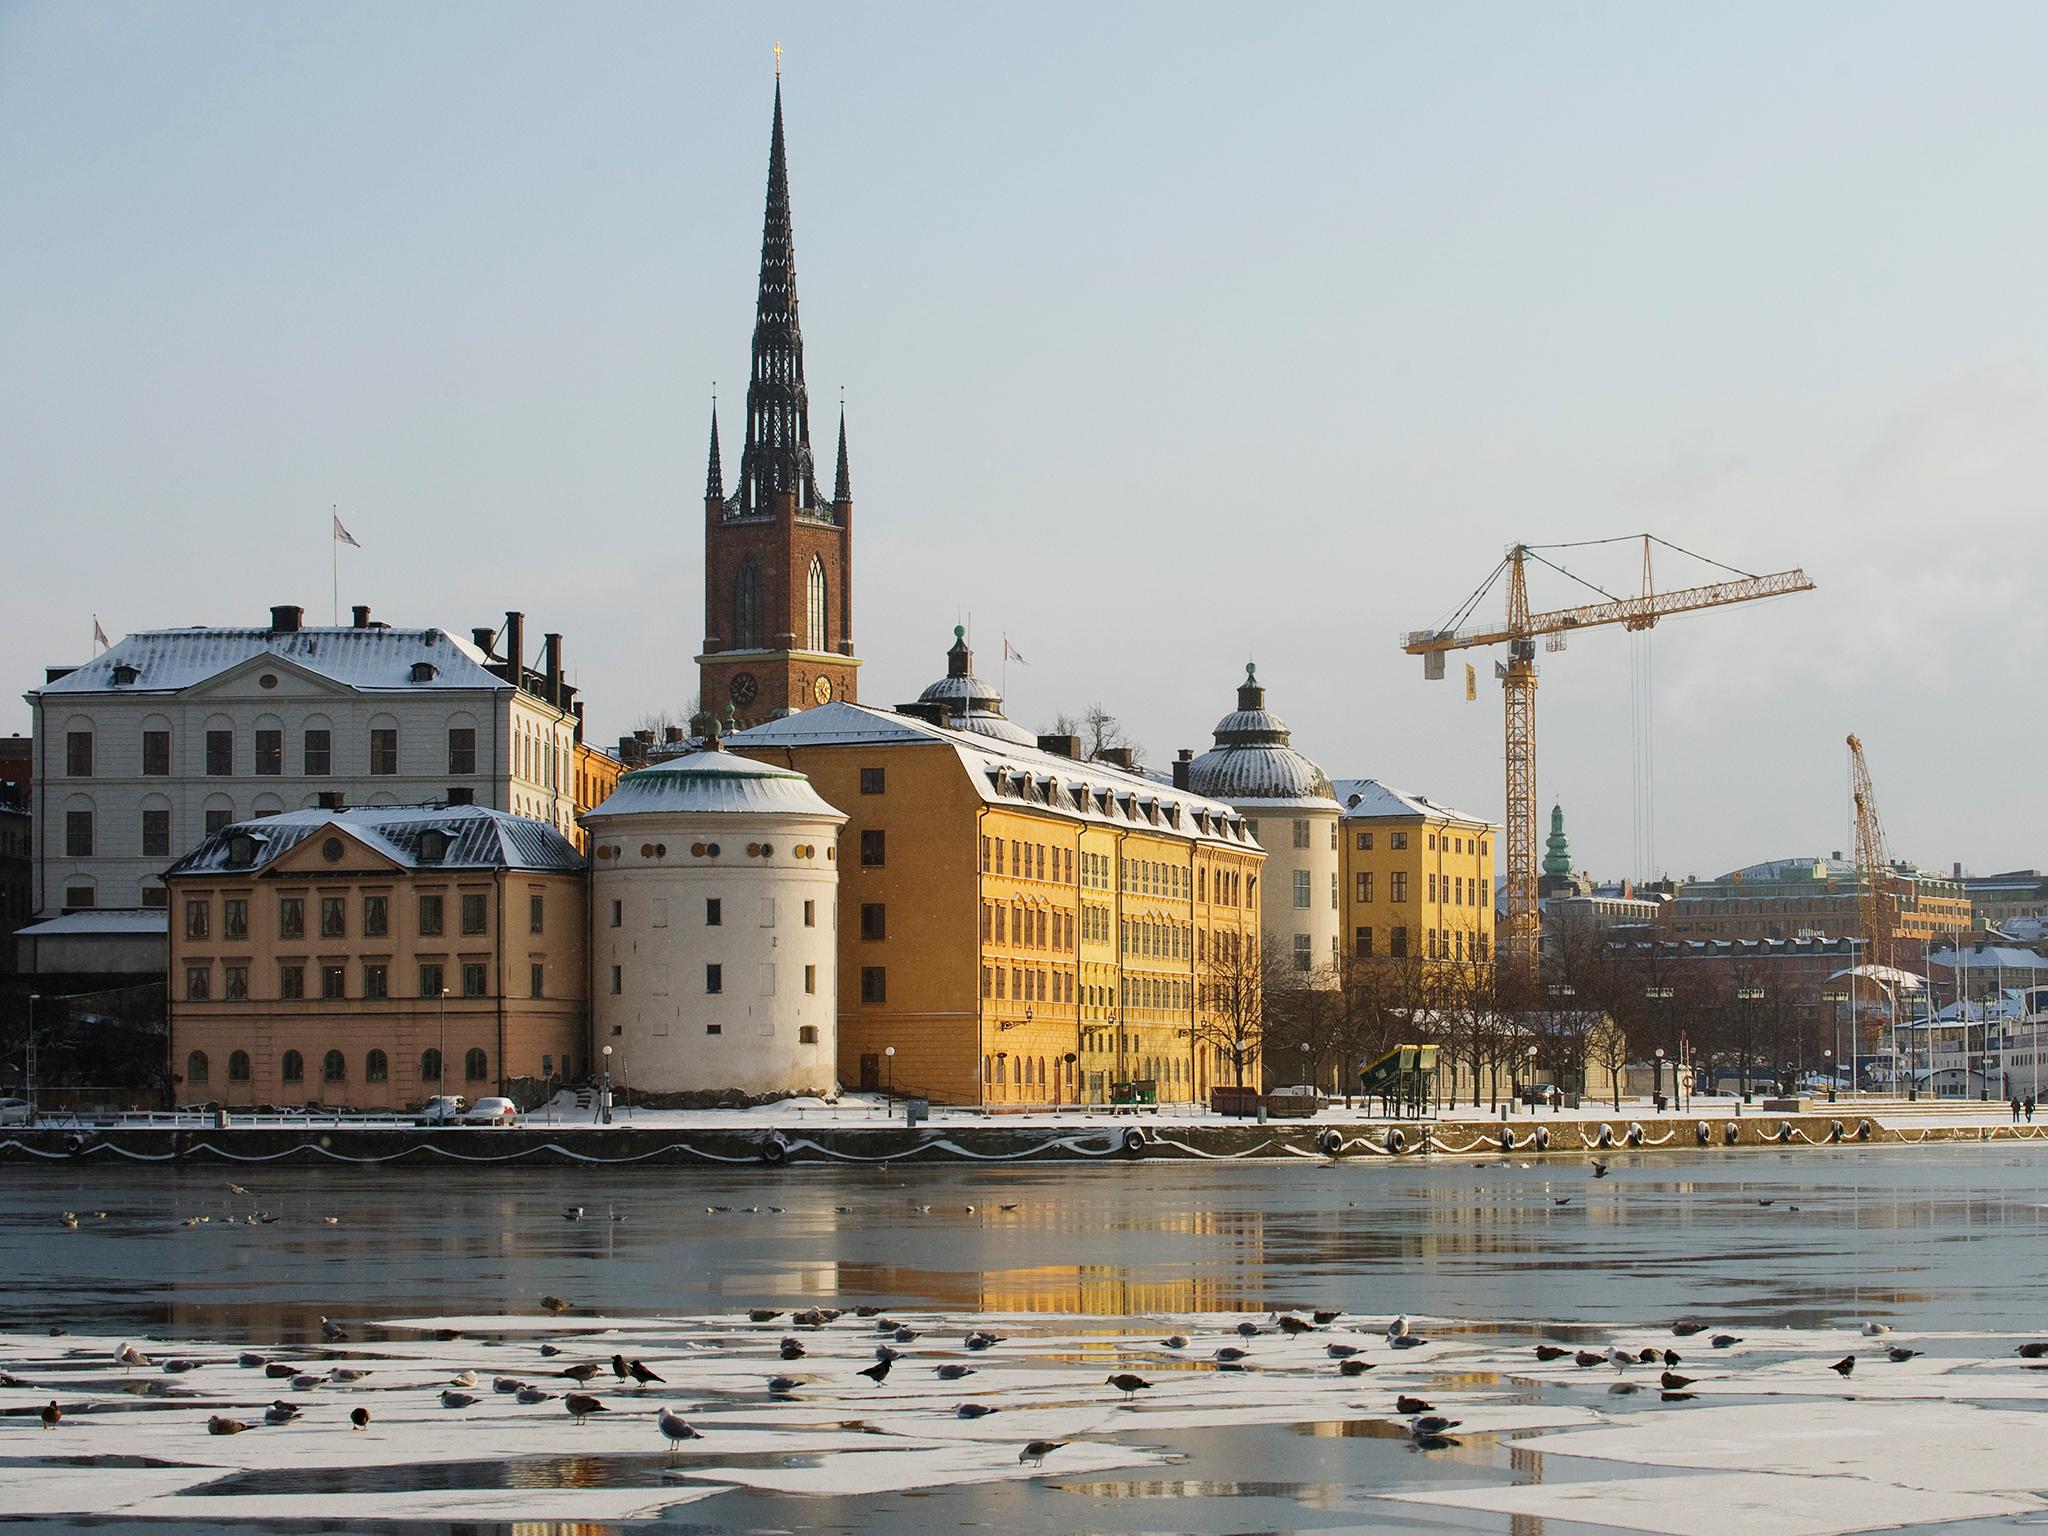 Sweden and the other Scandanvian countries are a 'beacon of hope' for Europe as the world enters another economic downturn